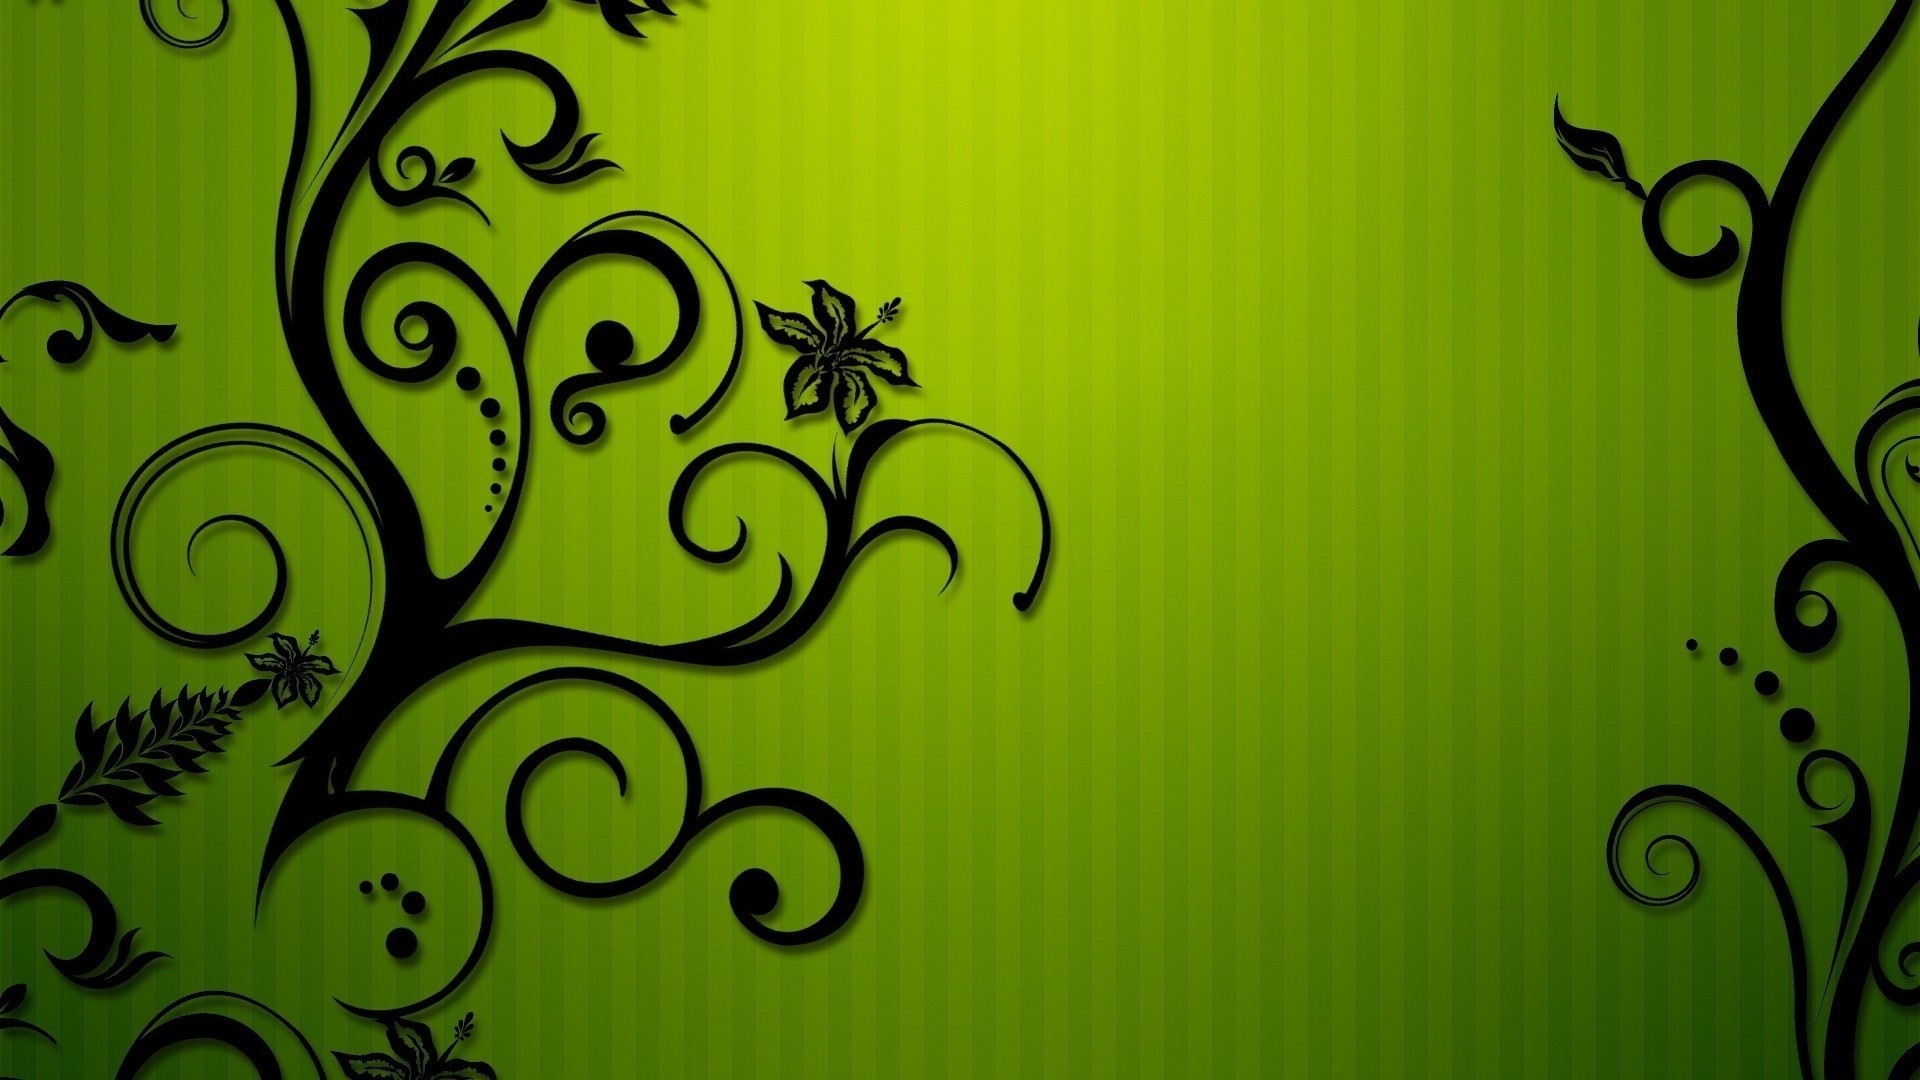 Black and Green HD Backgrounds With Resolution 1920X1080 pixel. You can make this wallpaper for your Desktop Computer Backgrounds, Mac Wallpapers, Android Lock screen or iPhone Screensavers